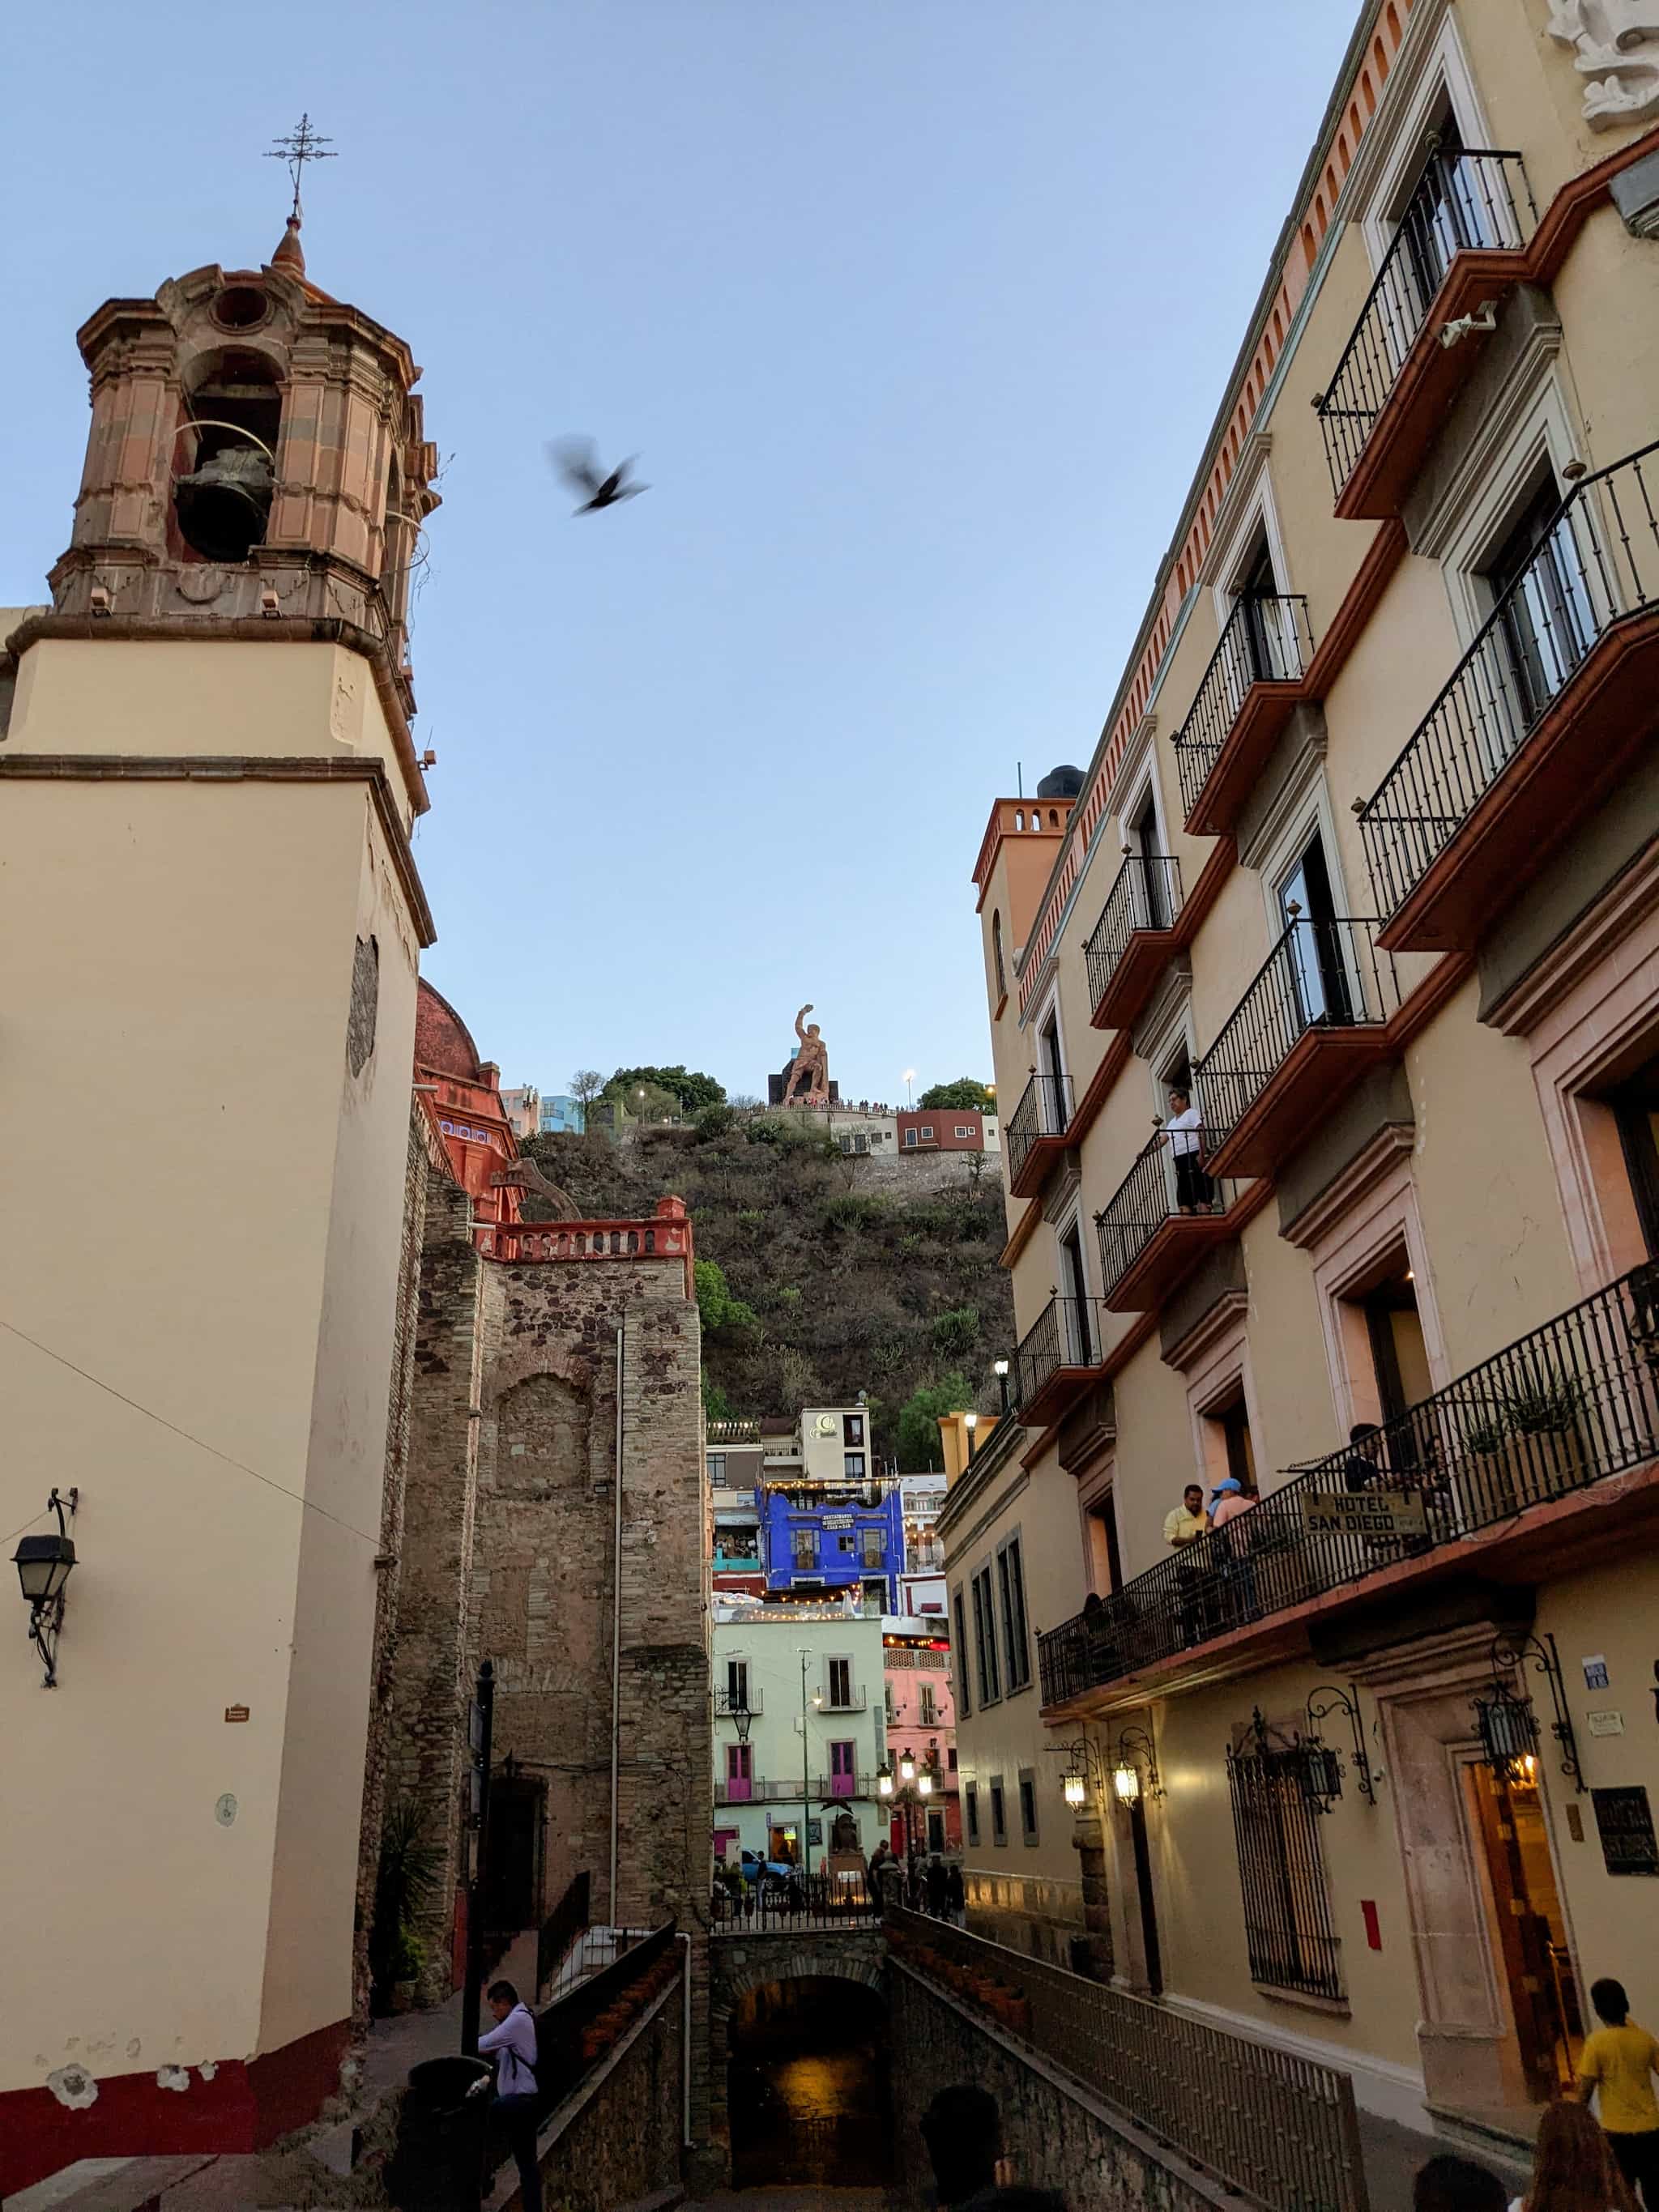 Looking up at a hill with a statue with a tunnel below, church to the side, colorful old buildings, and a flying pigeon.